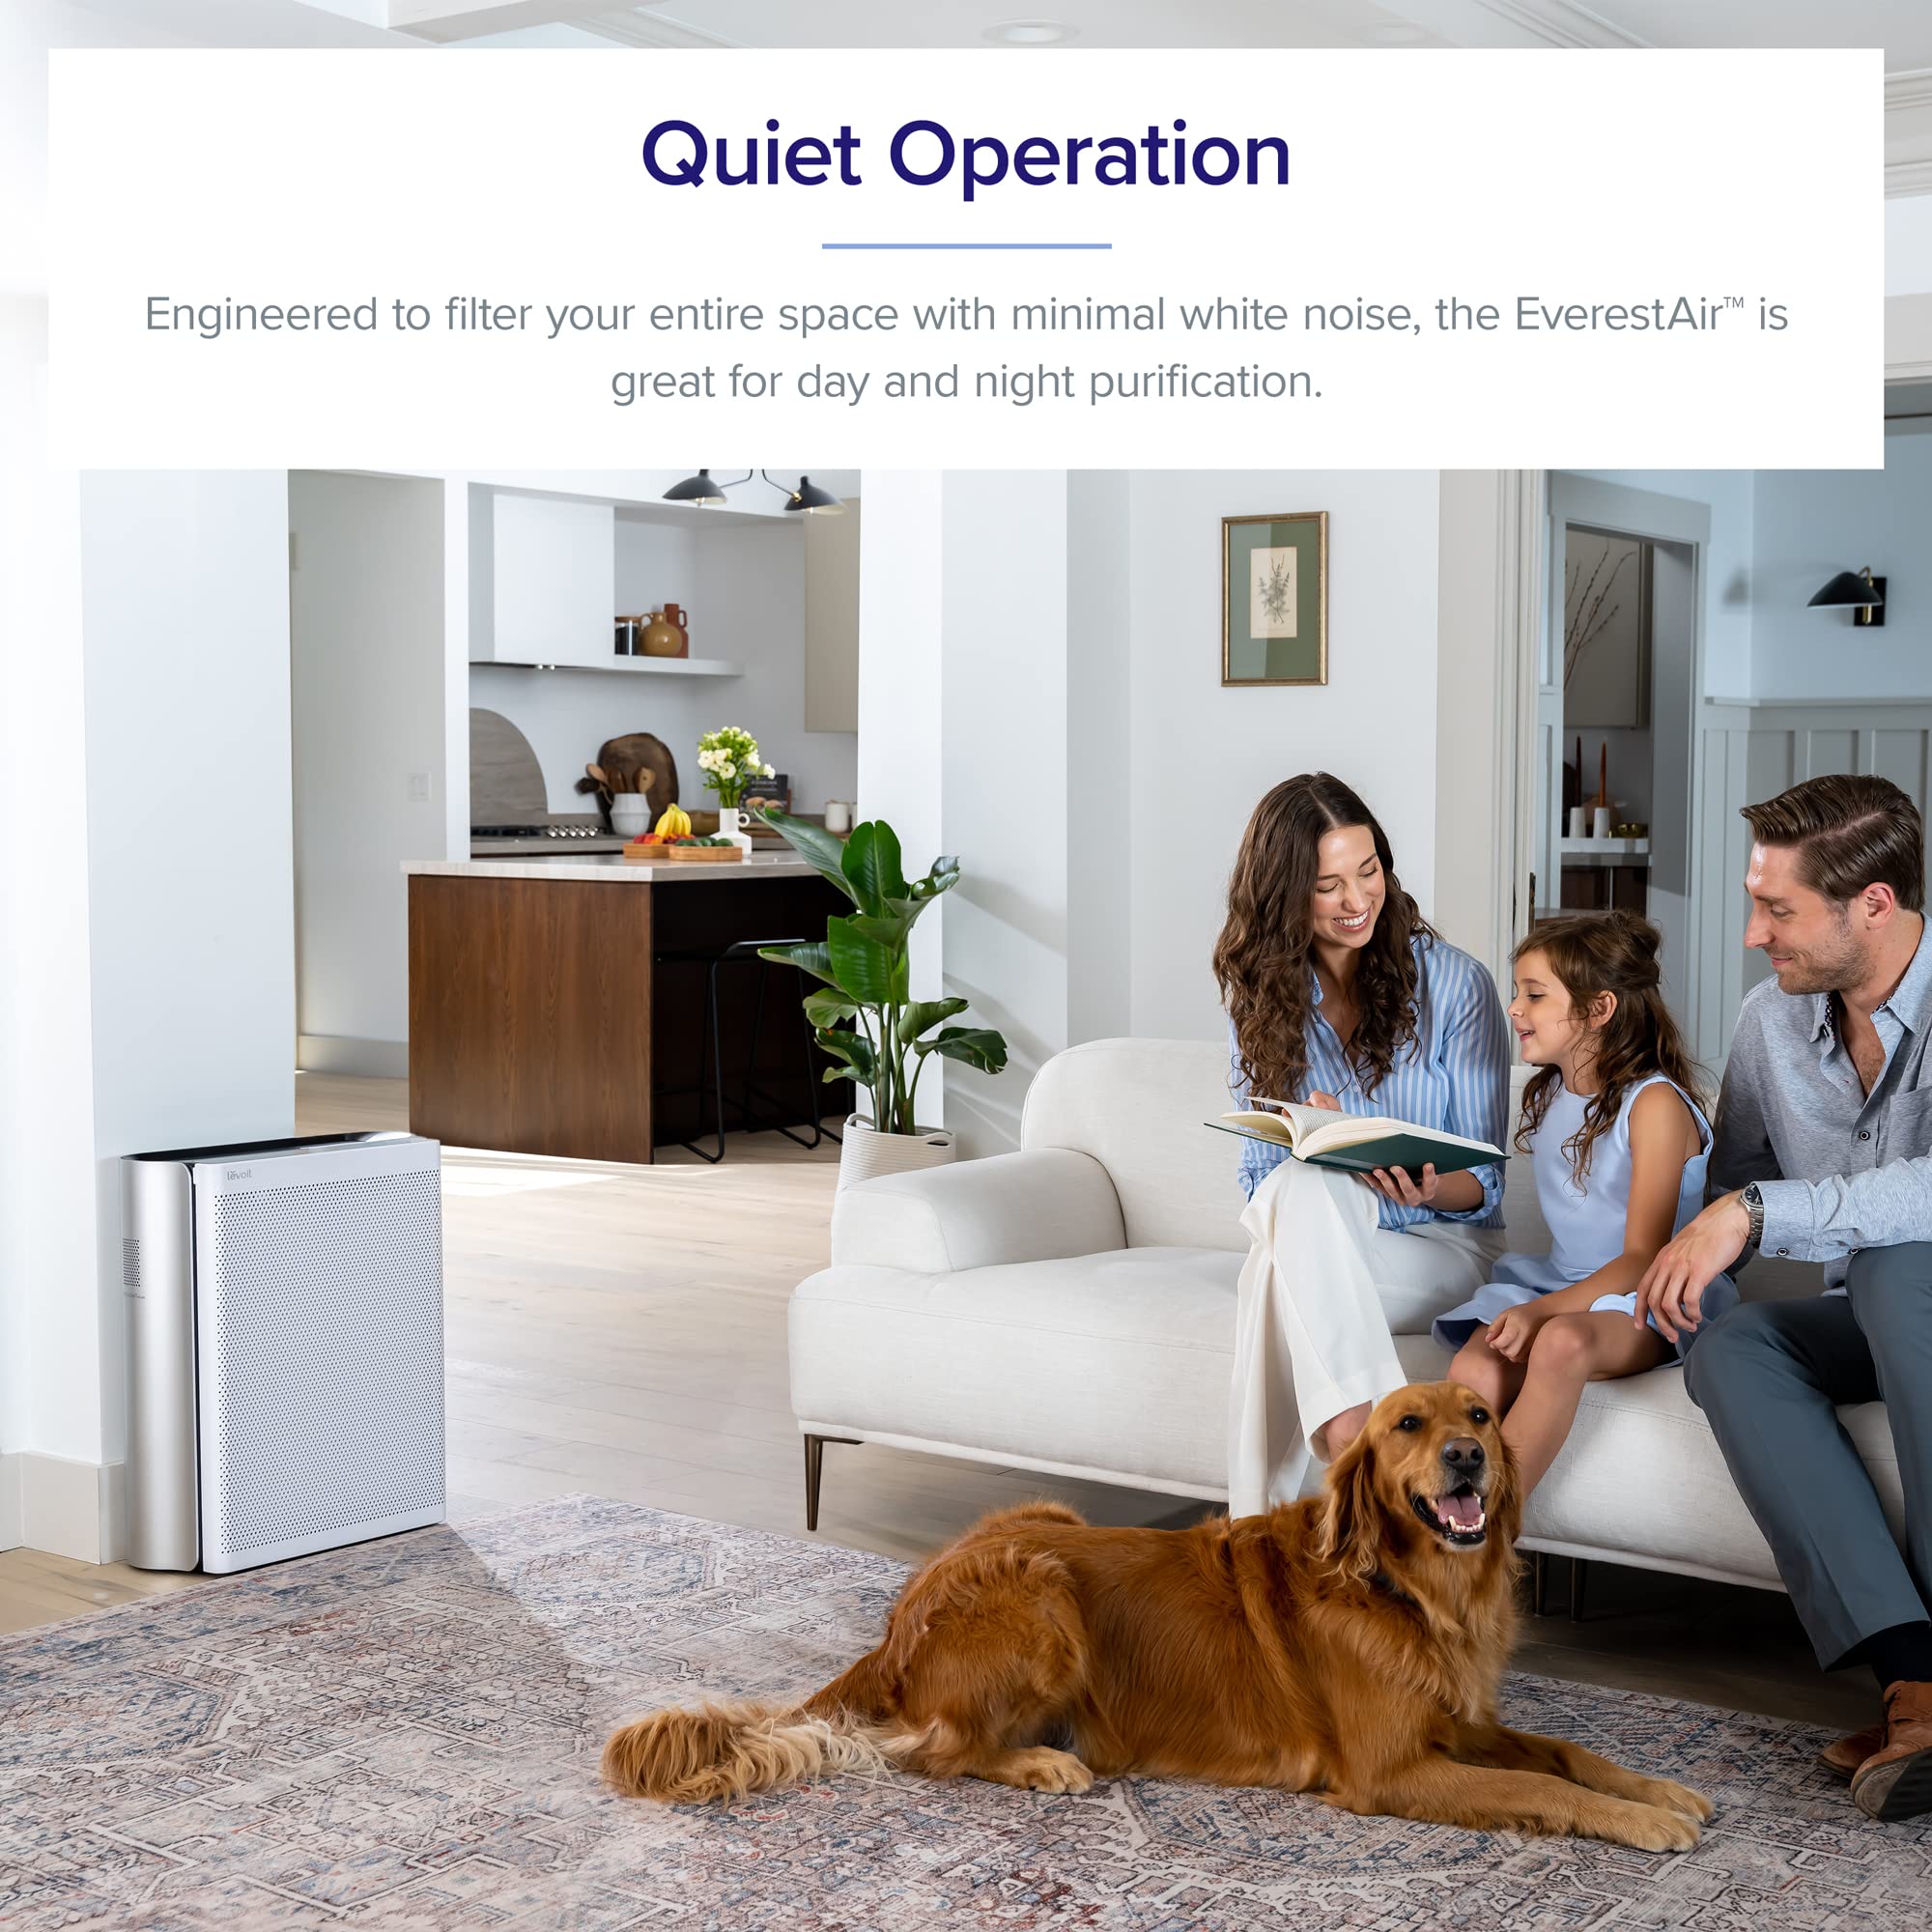 LEVOIT Air Purifiers for Home Large Room with Washable Filter, 3-Channel Air Quality Monitor, Smart WiFi and Filter for Pets, Allergies, Smoke, Dust, Pollen, Alexa Control, 2790 Ft², EverestAir